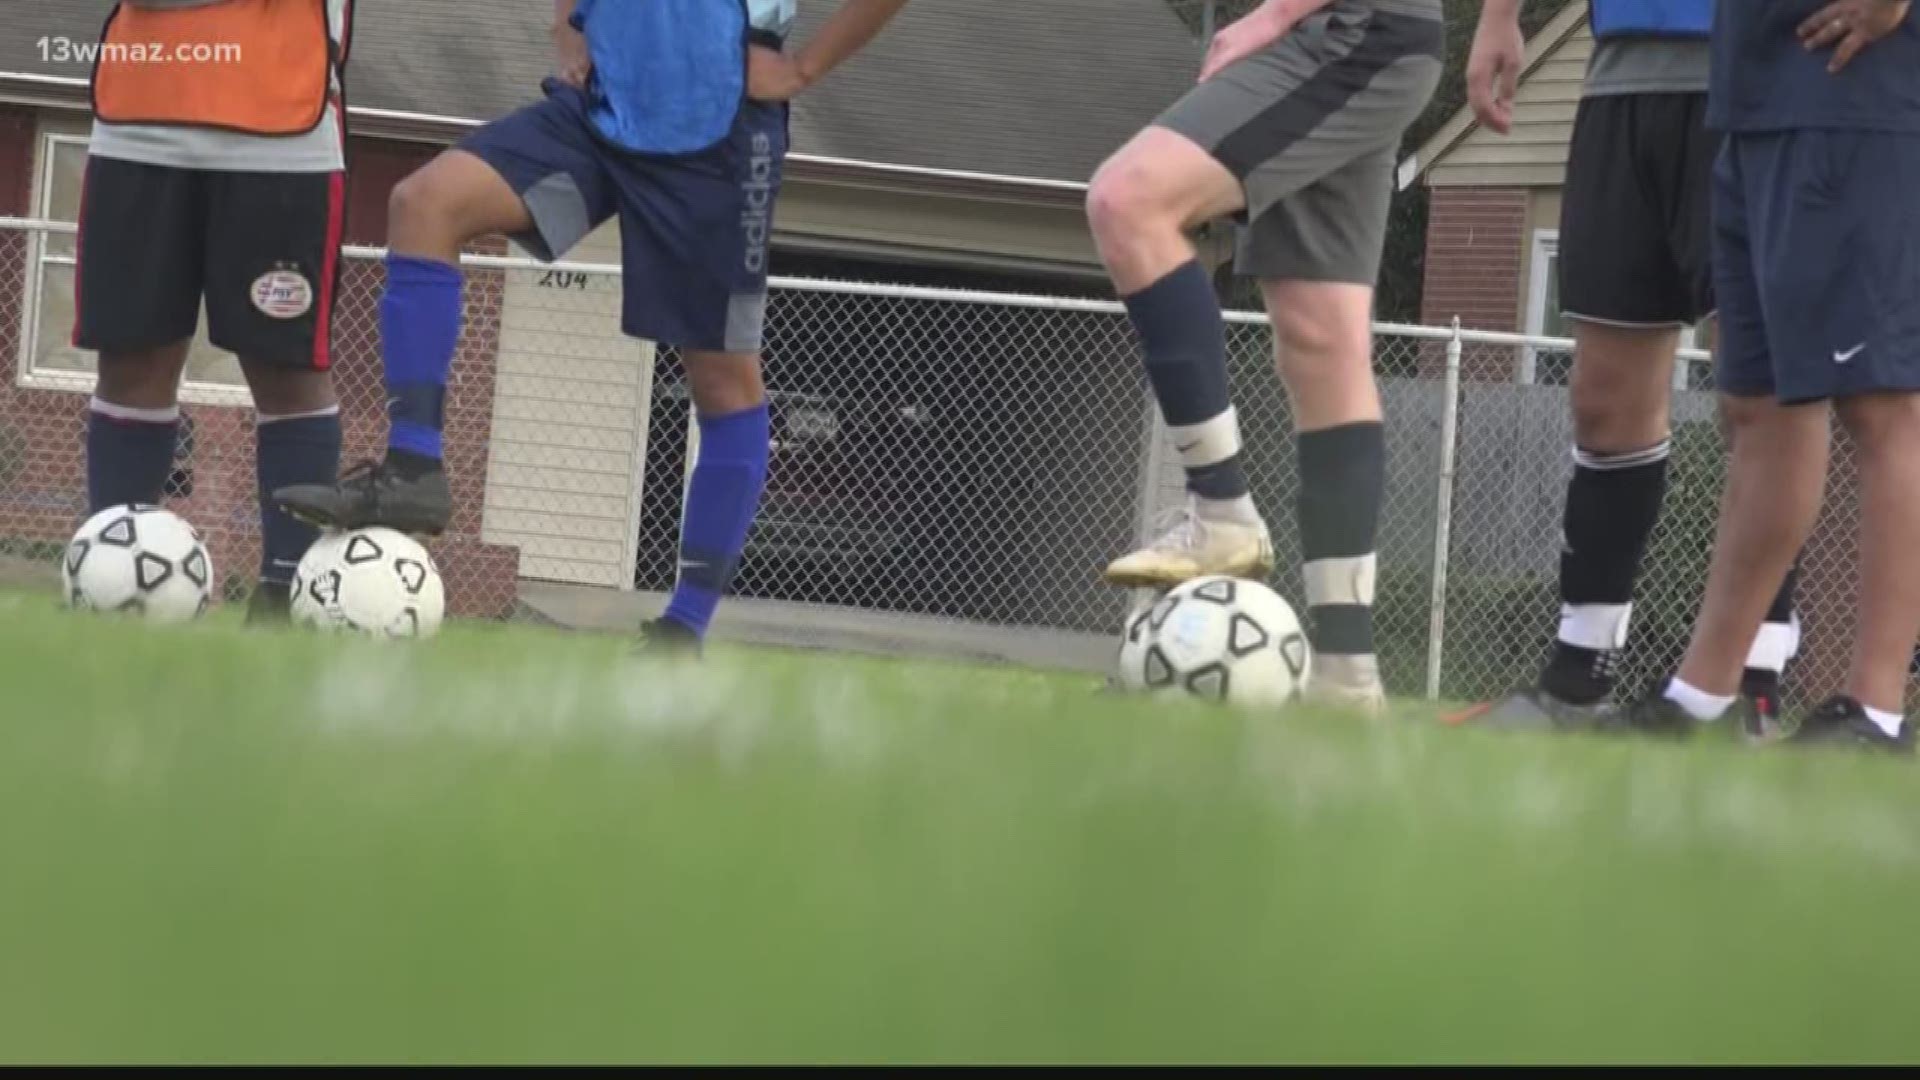 Cory Munson and Thomas Eskew have been playing soccer together for years. They know how to be leaders for the Northside Eagles men's soccer team. Coach Sam Said explains what makes this duo so talented on the pitch.